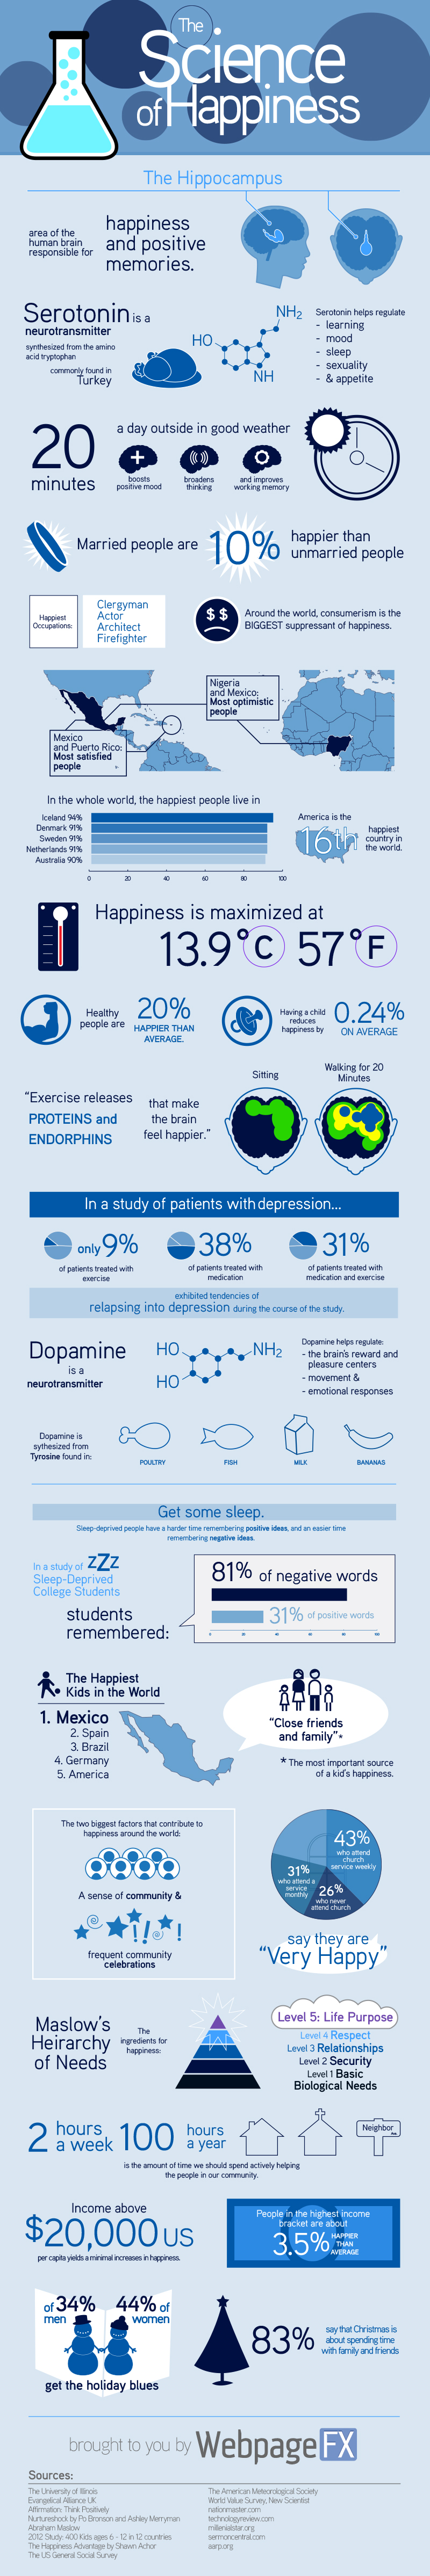 Science_of_Happiness_Infographic_2_800